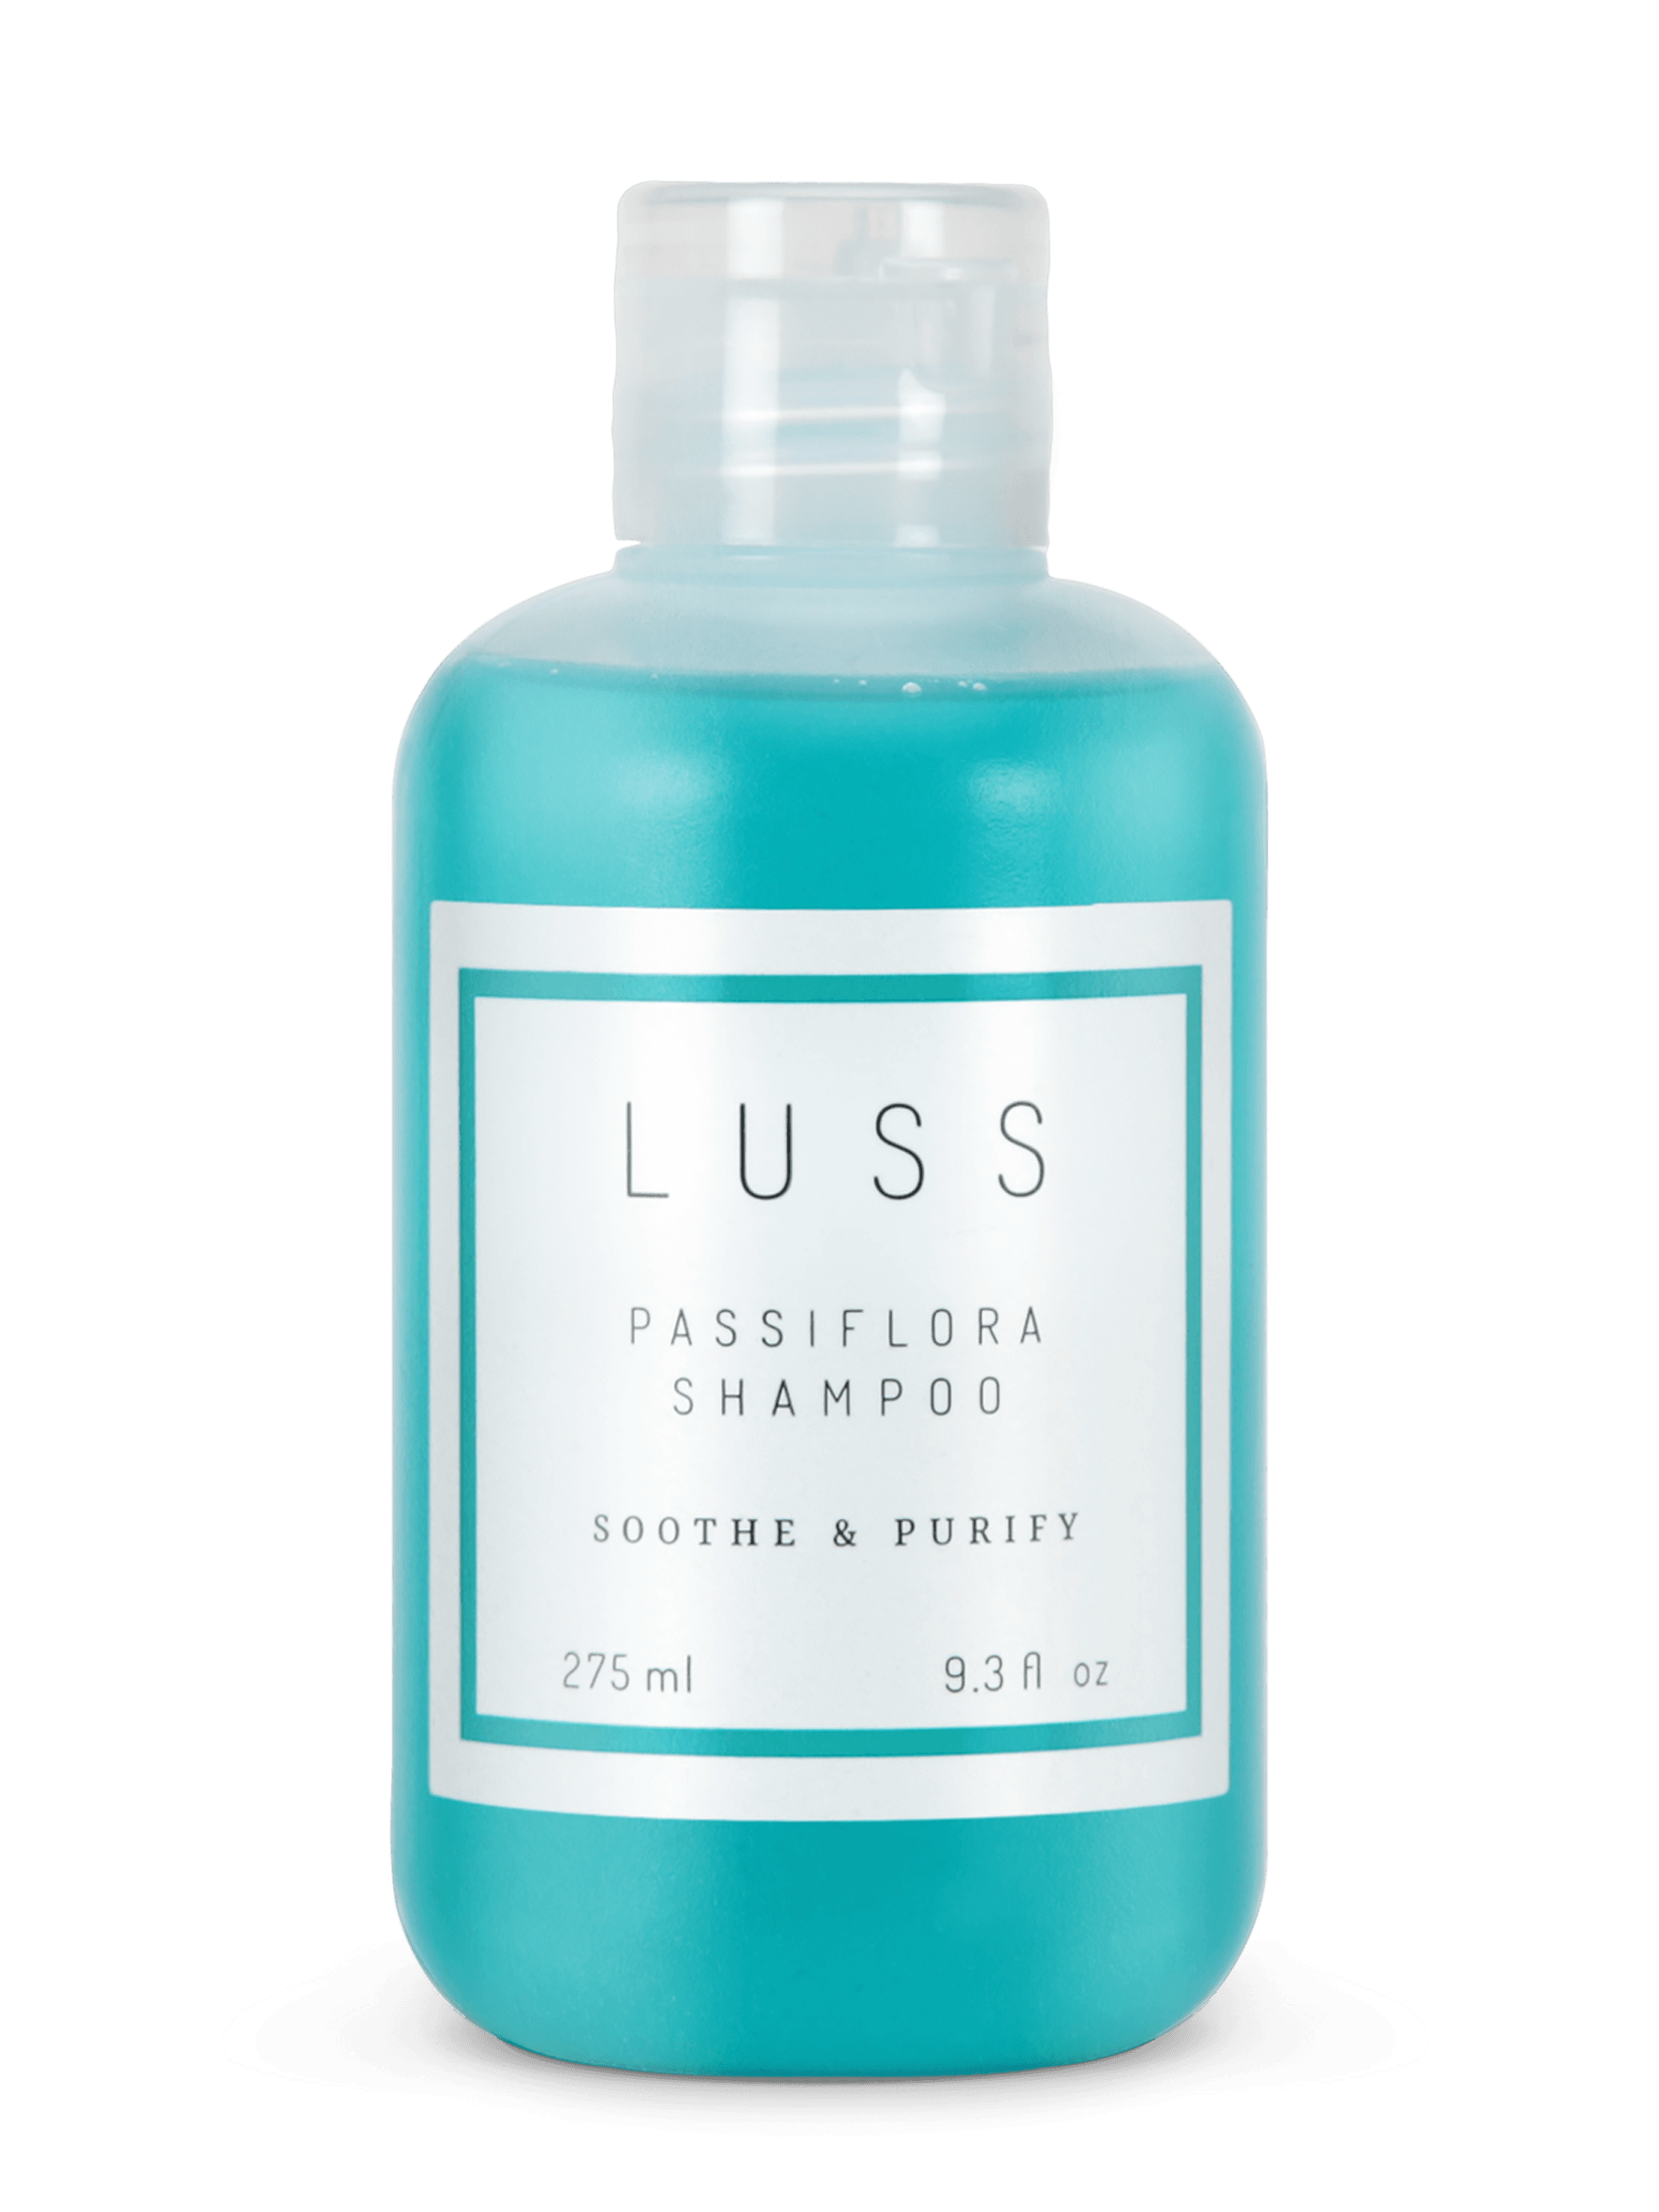 LUSS Passiflora Shampoo Soothe&Purify